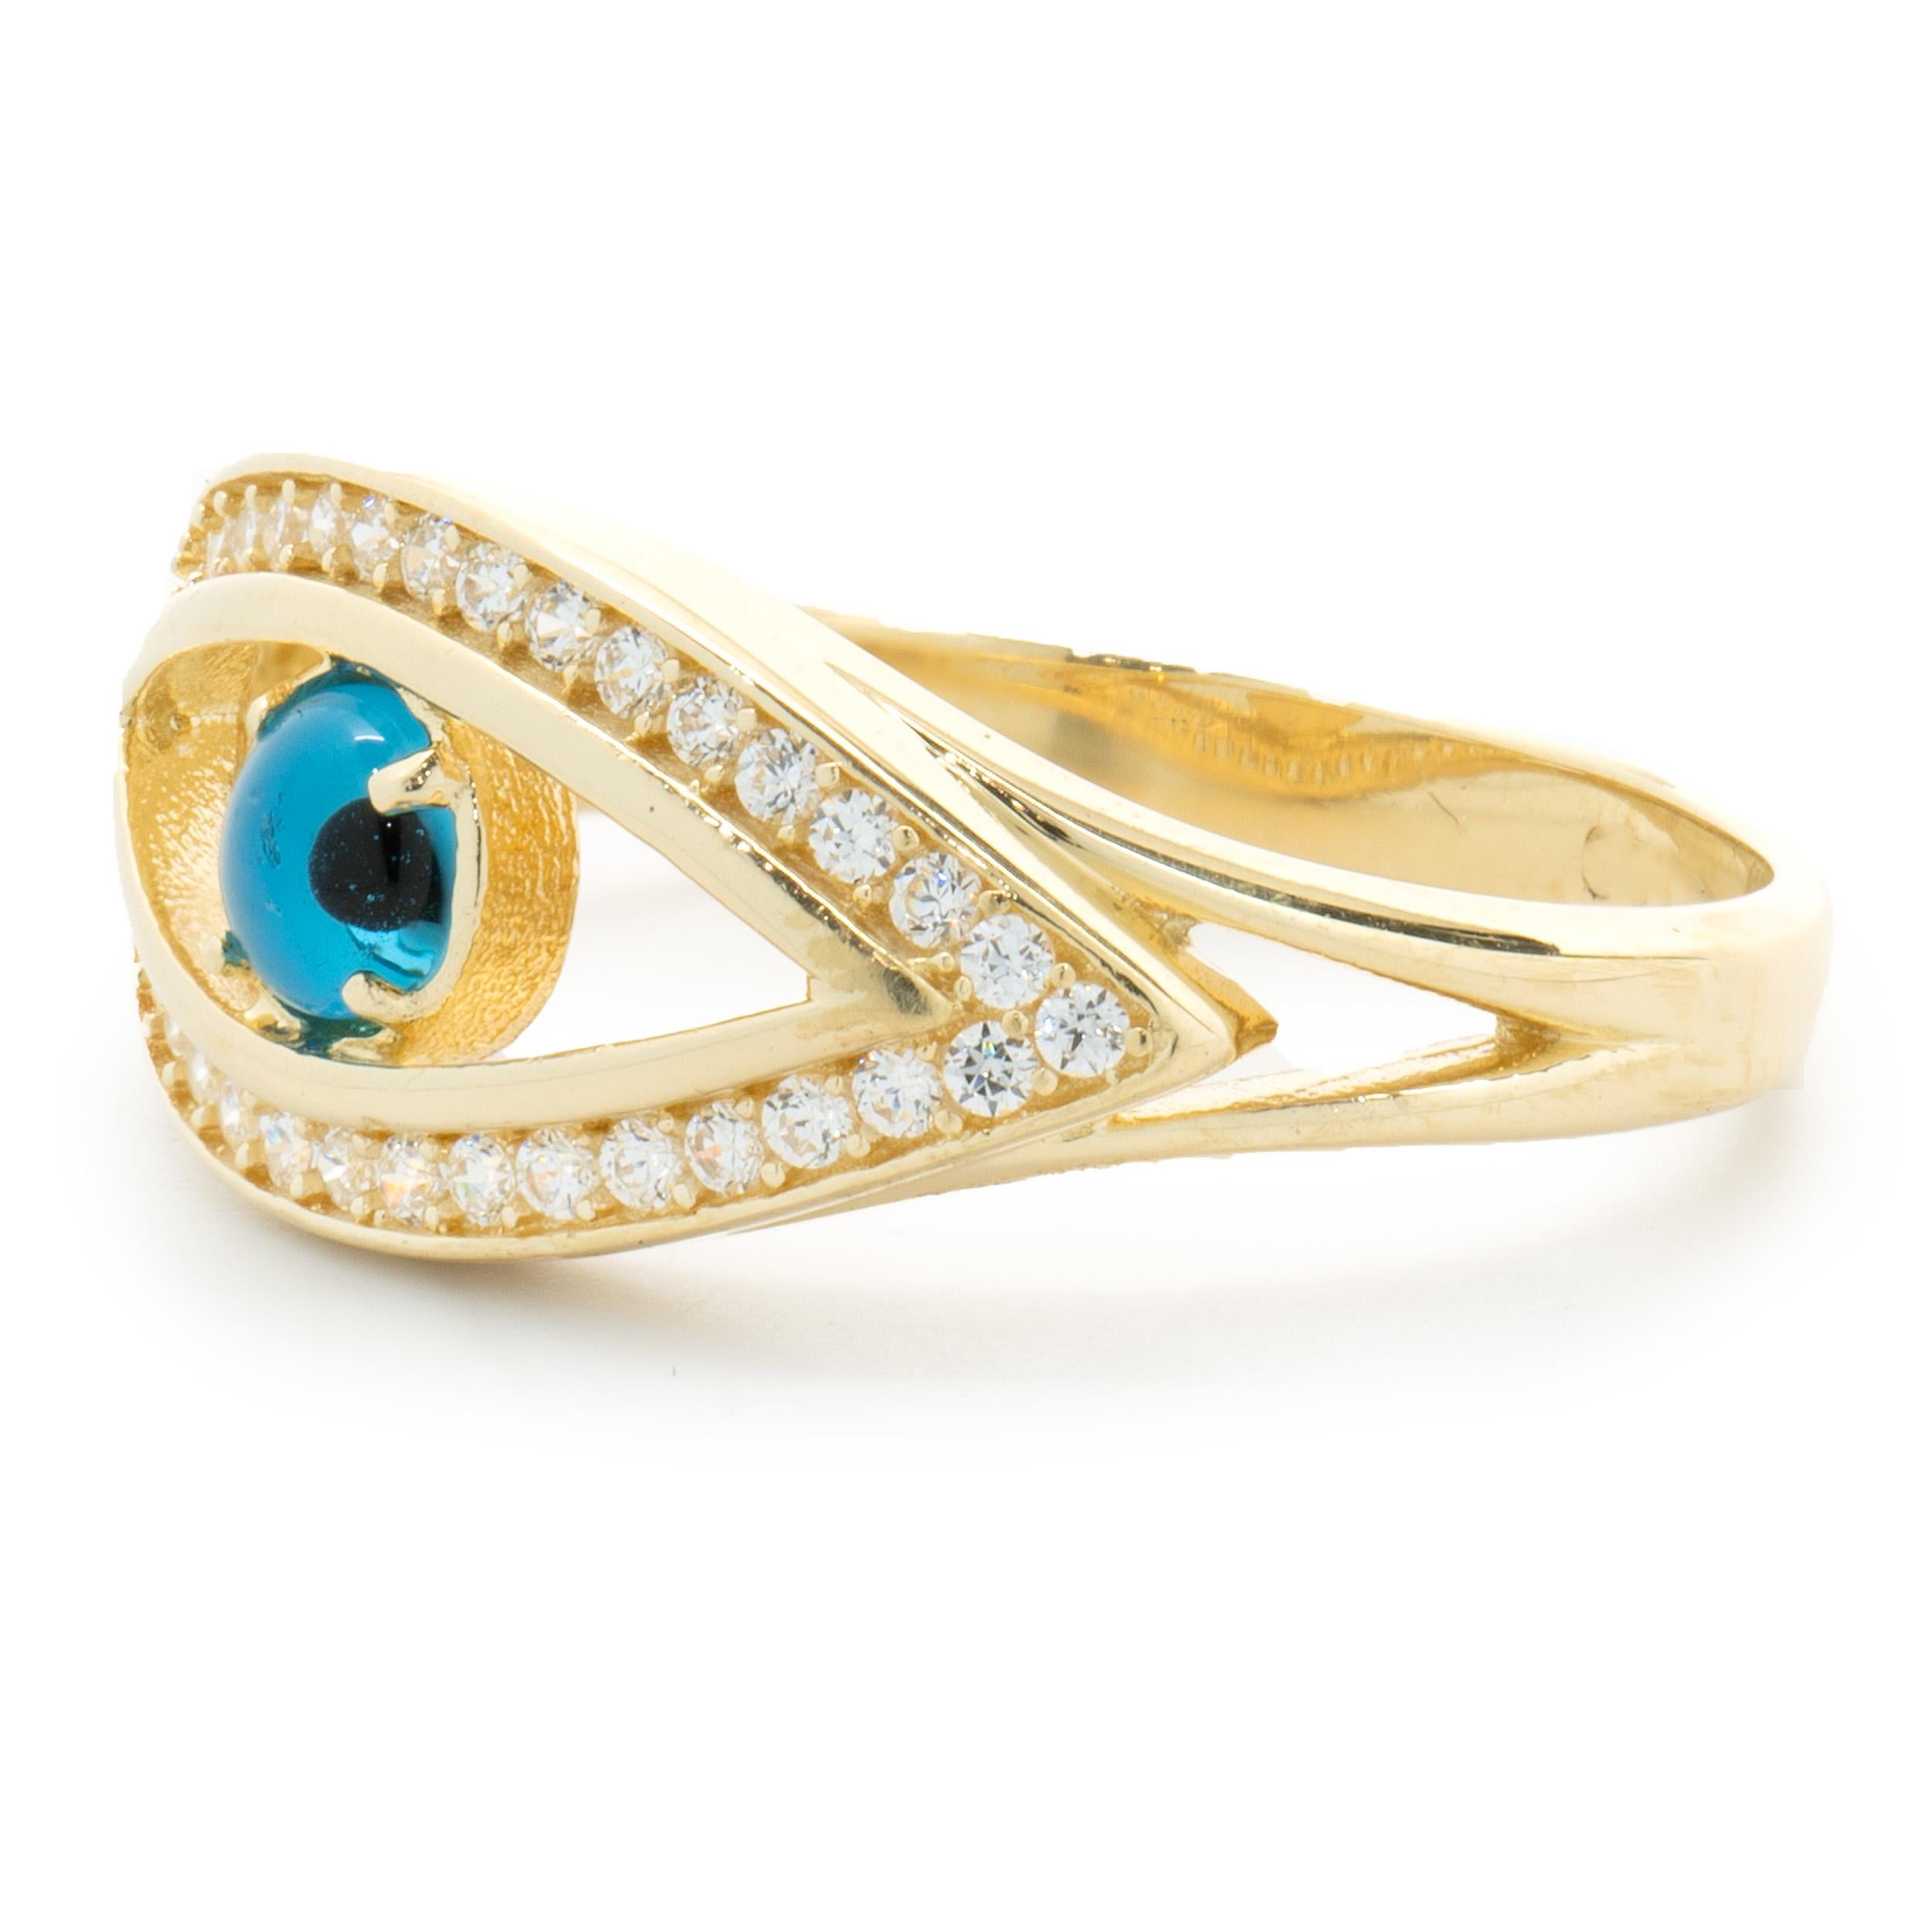 18 Karat Yellow Gold Diamond Evil Eye Ring In Excellent Condition For Sale In Scottsdale, AZ